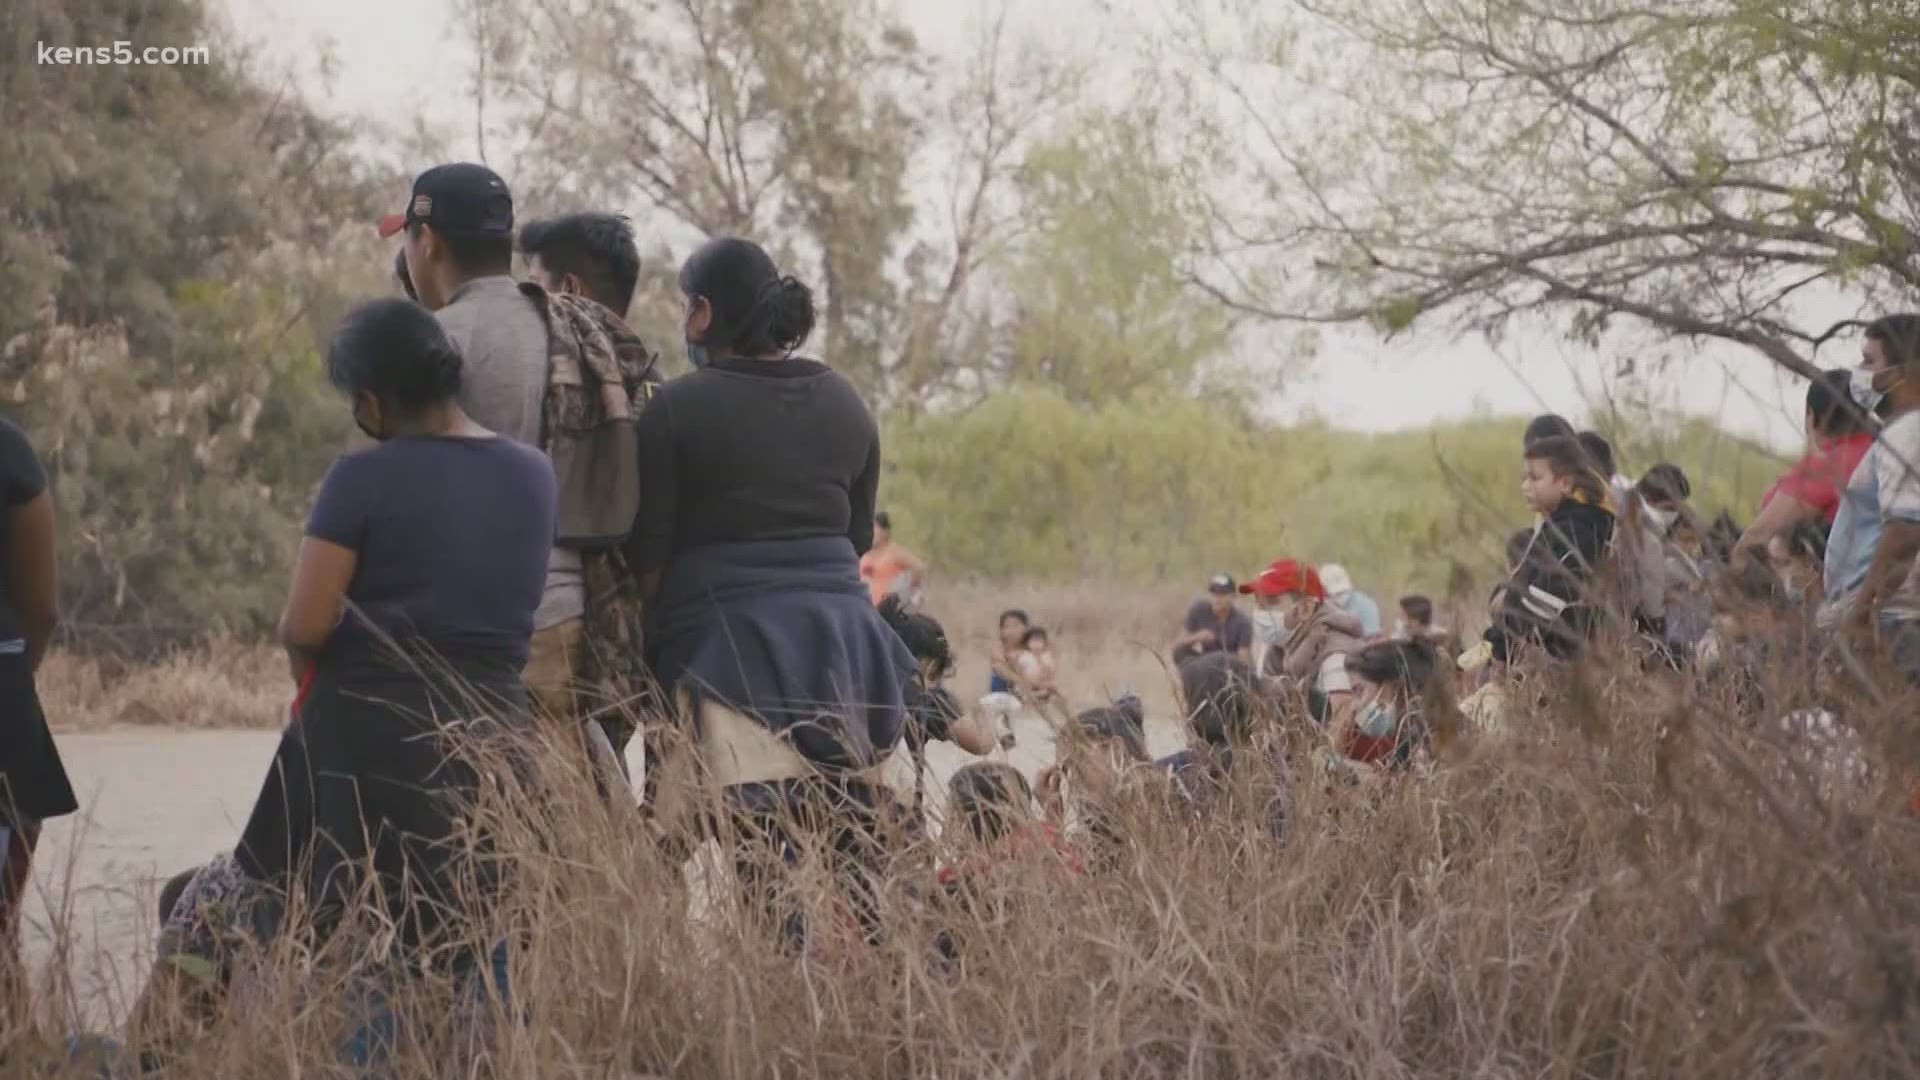 Since 2014, San Antonio's Mennonite Church has stepped up to help house asylum-seekers apprehended at the border.